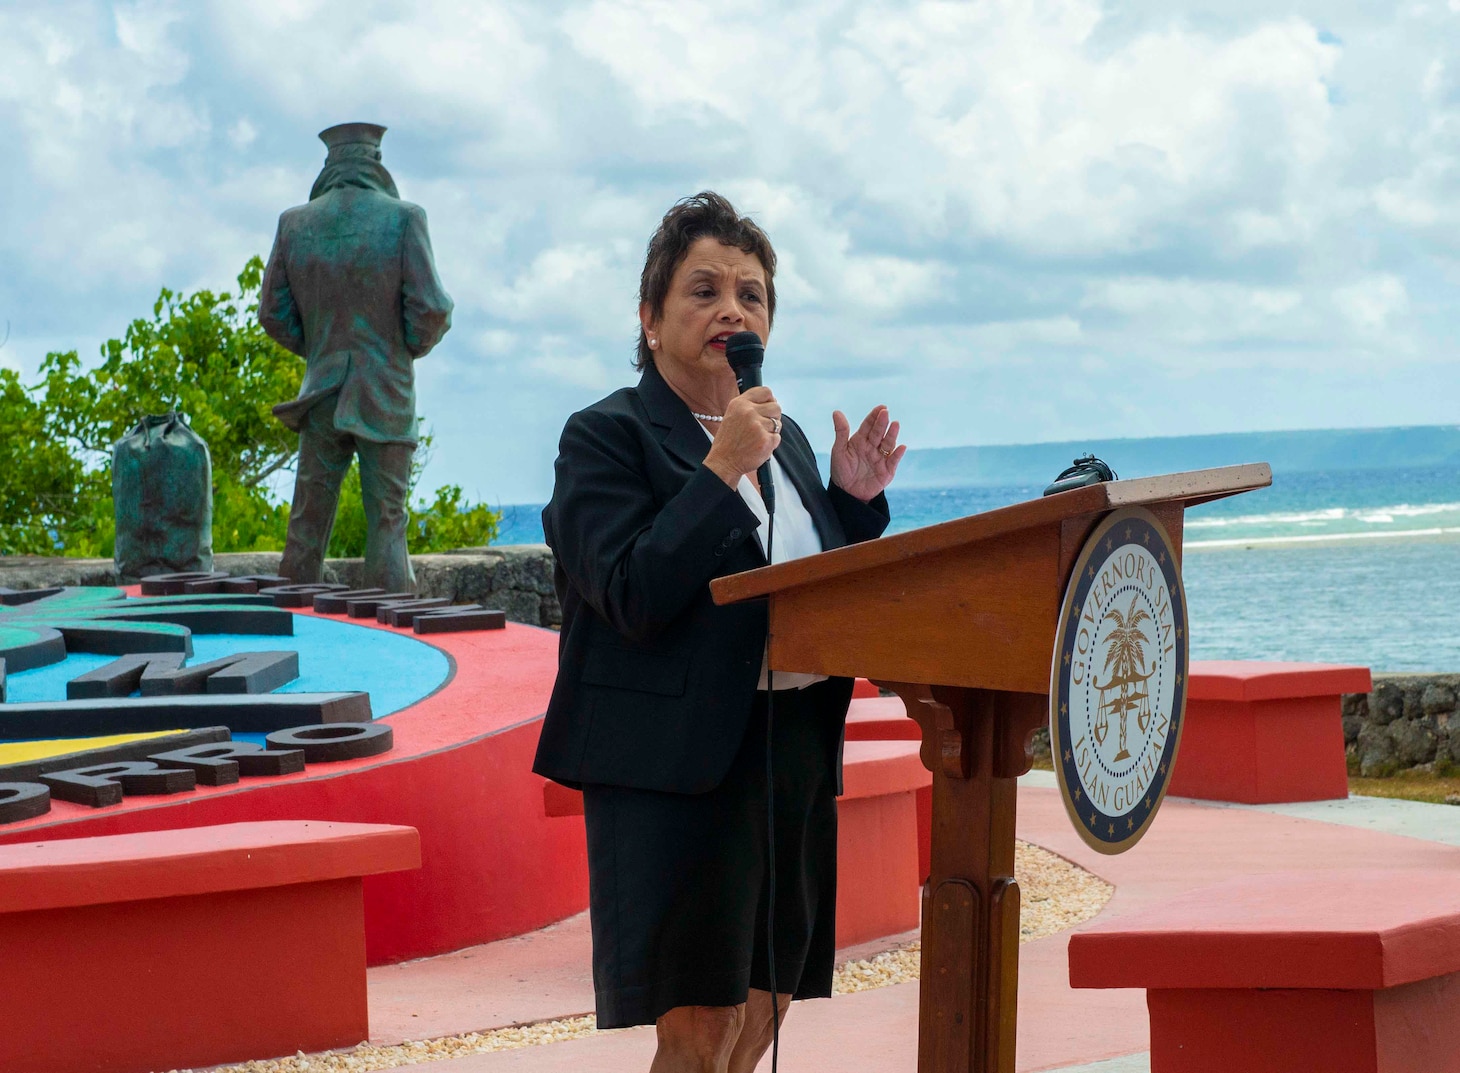 HAGÅTÑA, Guam (April 30, 2019) – Governor of Guam Lou Leon Guerrero delivers remarks during an unveiling of the official plaques for the Lone Sailor statue at the Ricardo J. Bordallo Governor's Complex in Hagåtña April 30.